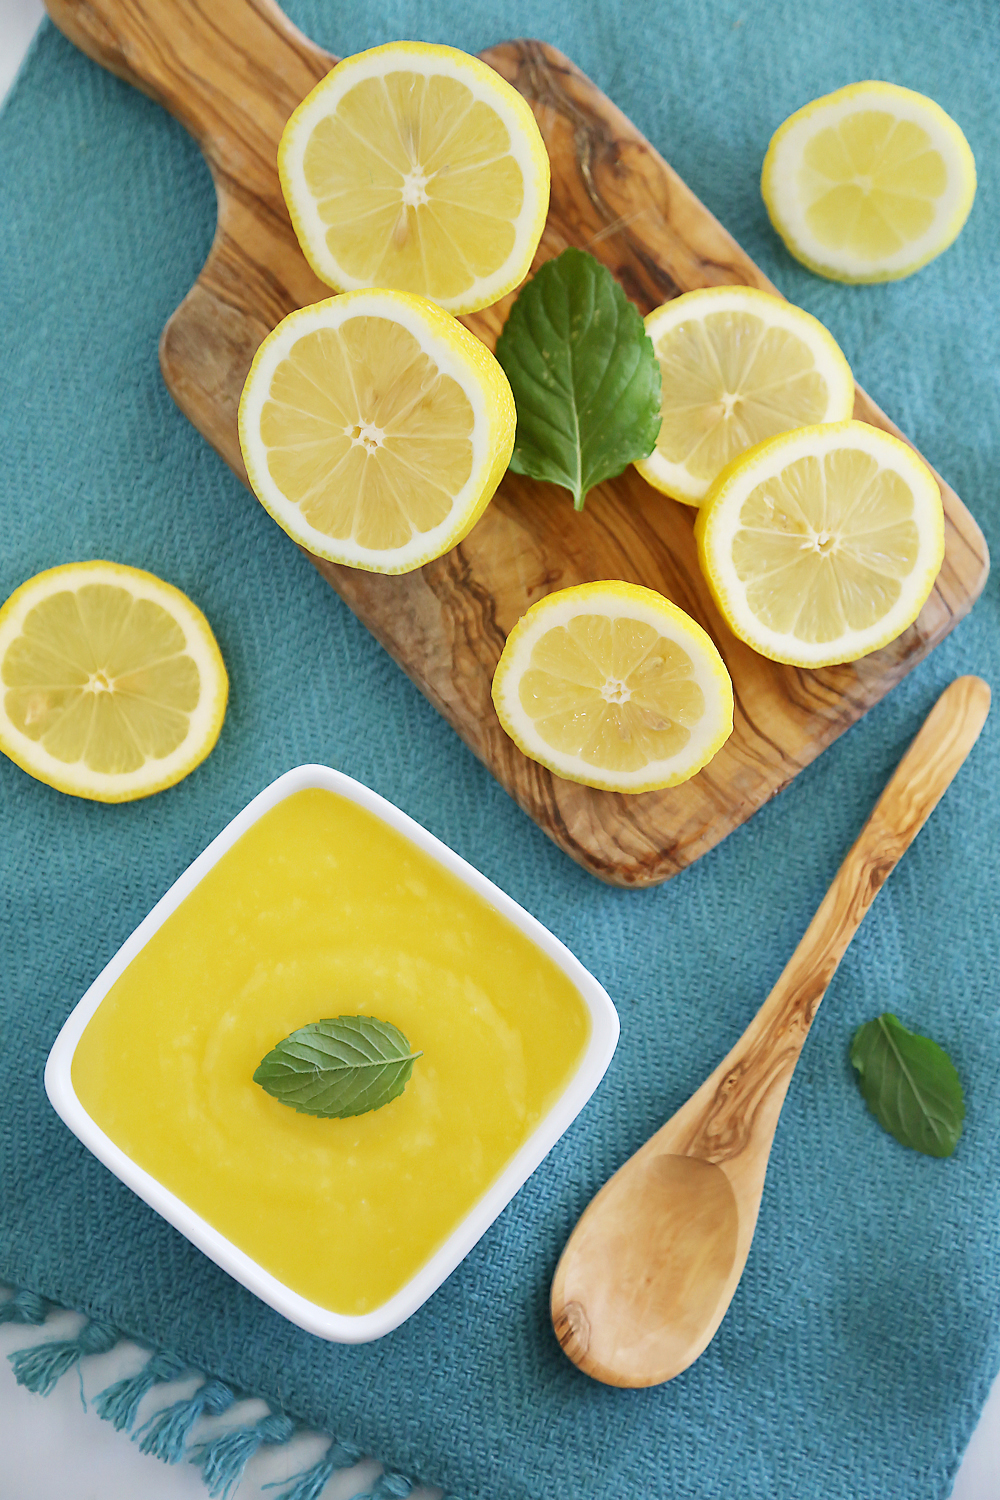 Perfect 5-Minute Microwave Lemon Curd - Silky smooth + made from scratch easily in your microwave! Just 5 minutes and 5 ingredients. Thecomfortofcooking.com